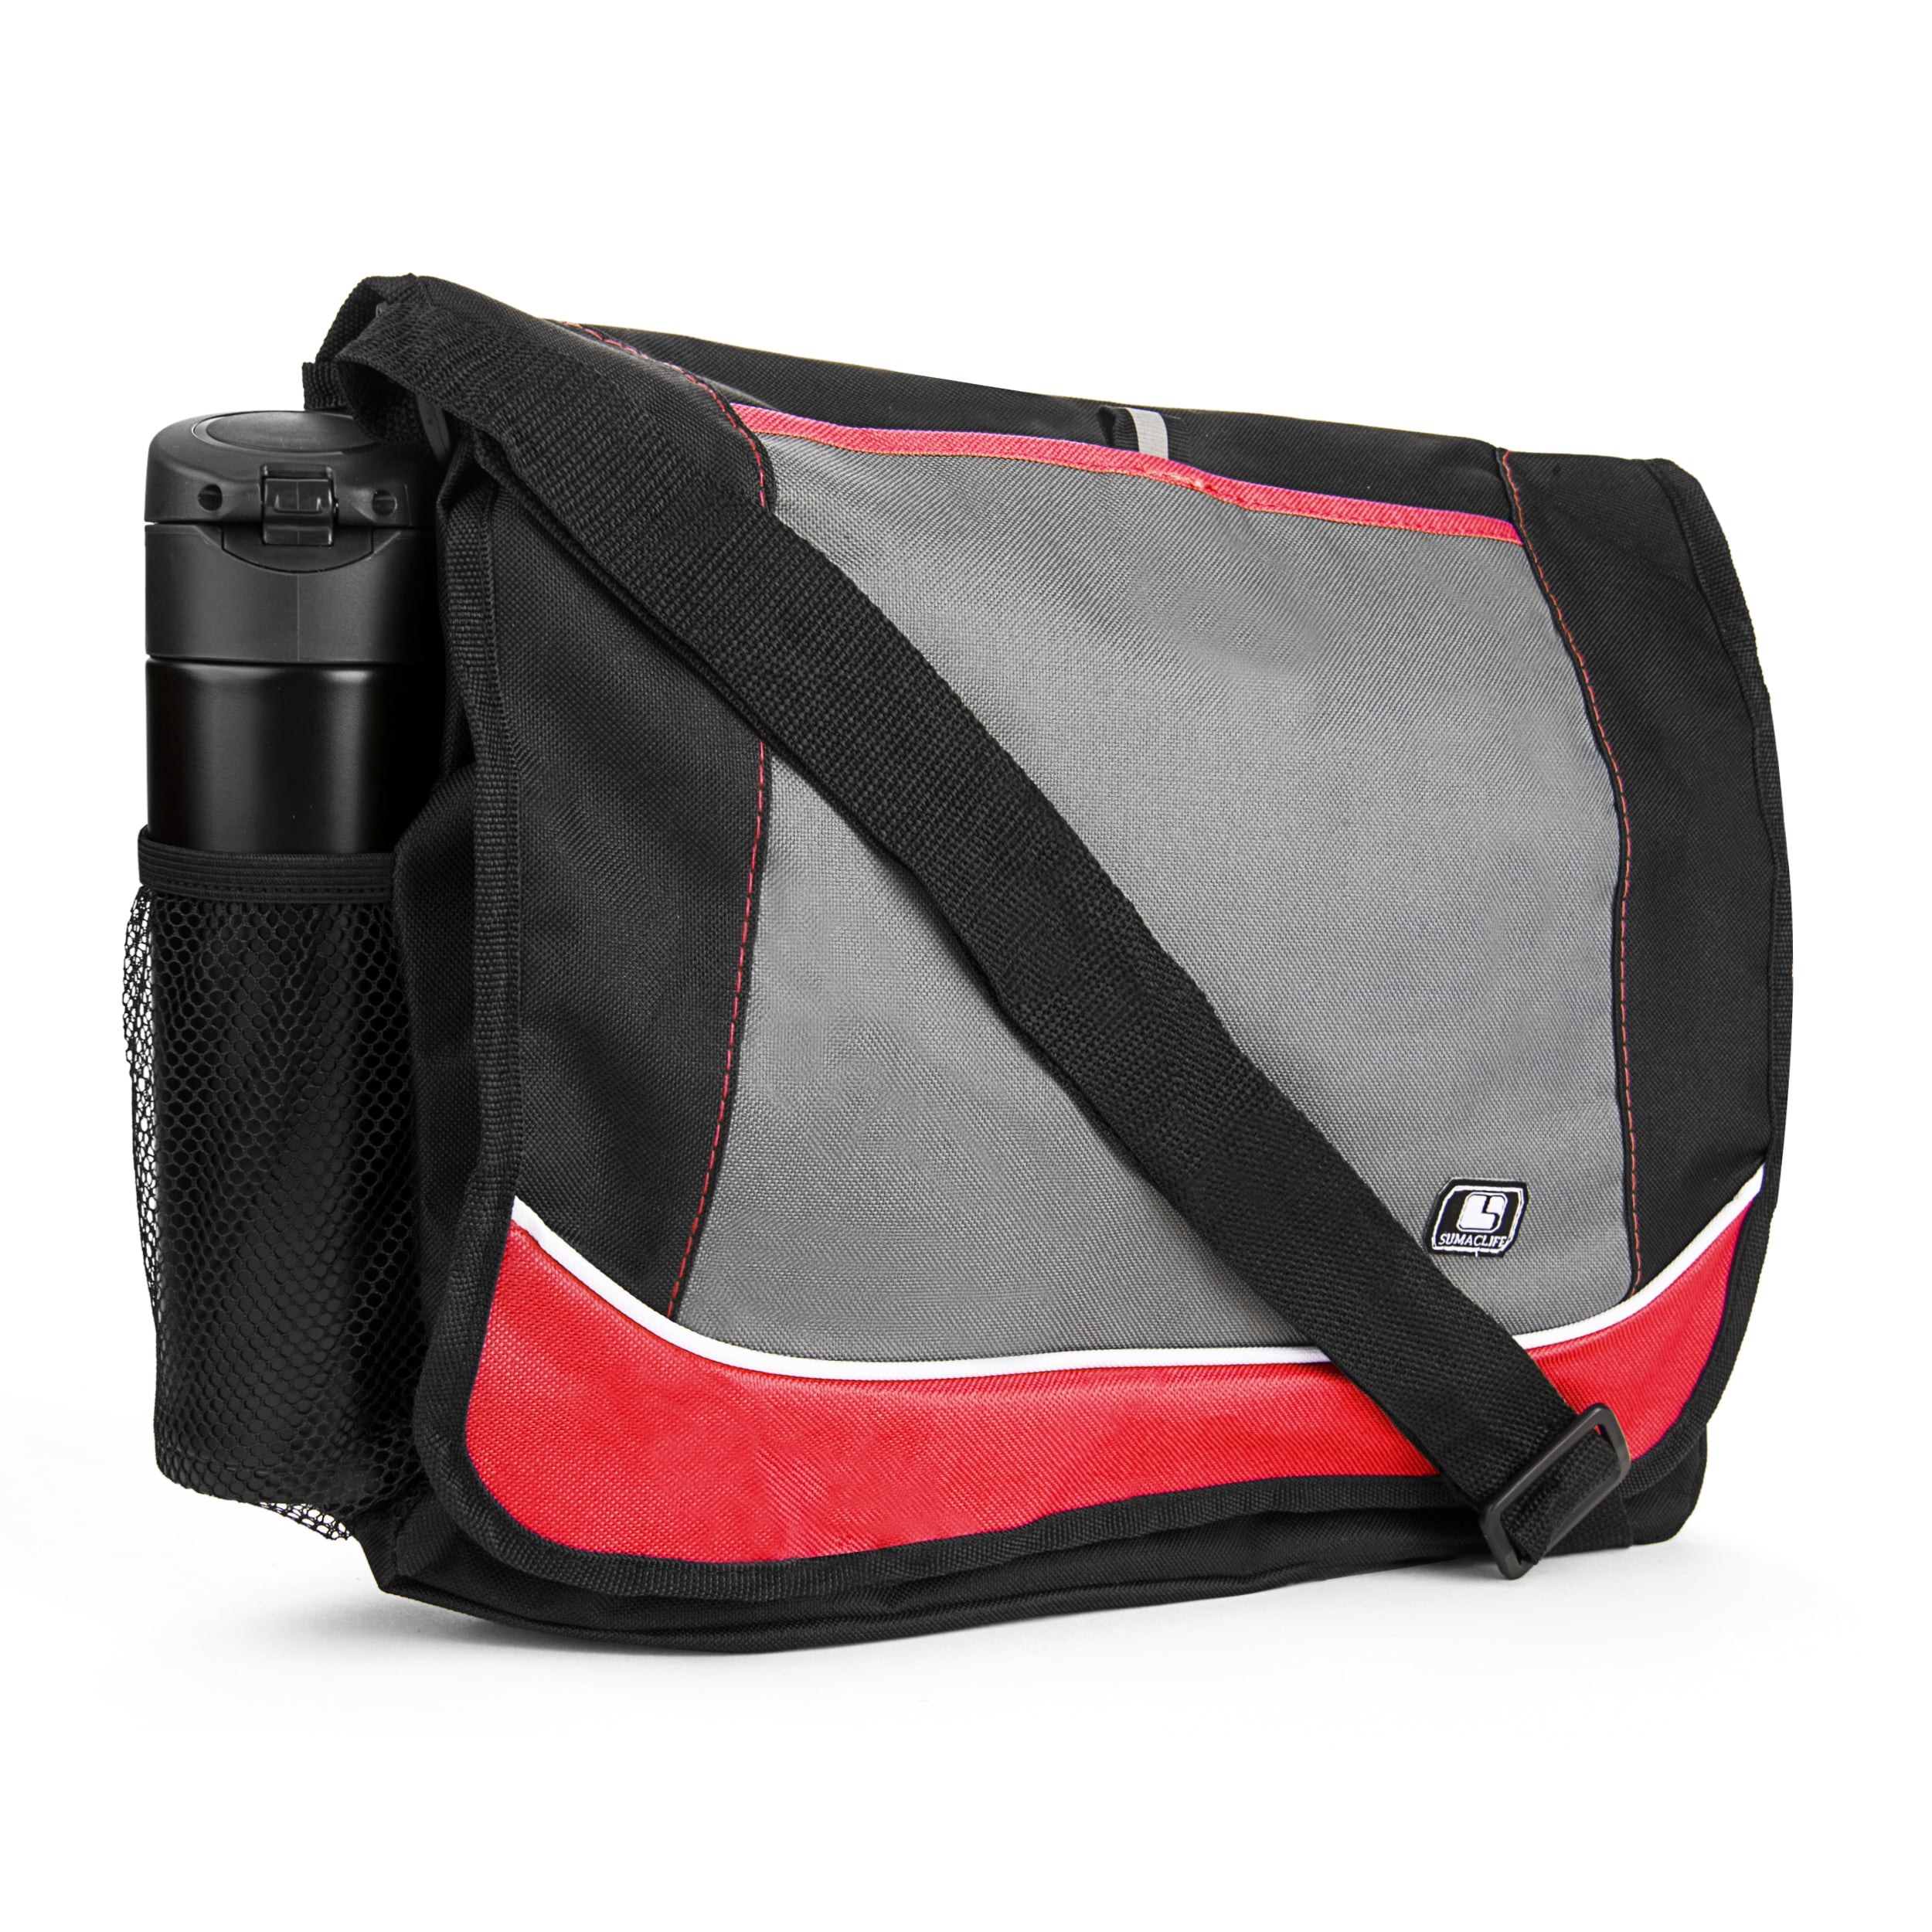 Red SumacLife Messenger Bag fits Tablets and Laptops up to 15.6 inch